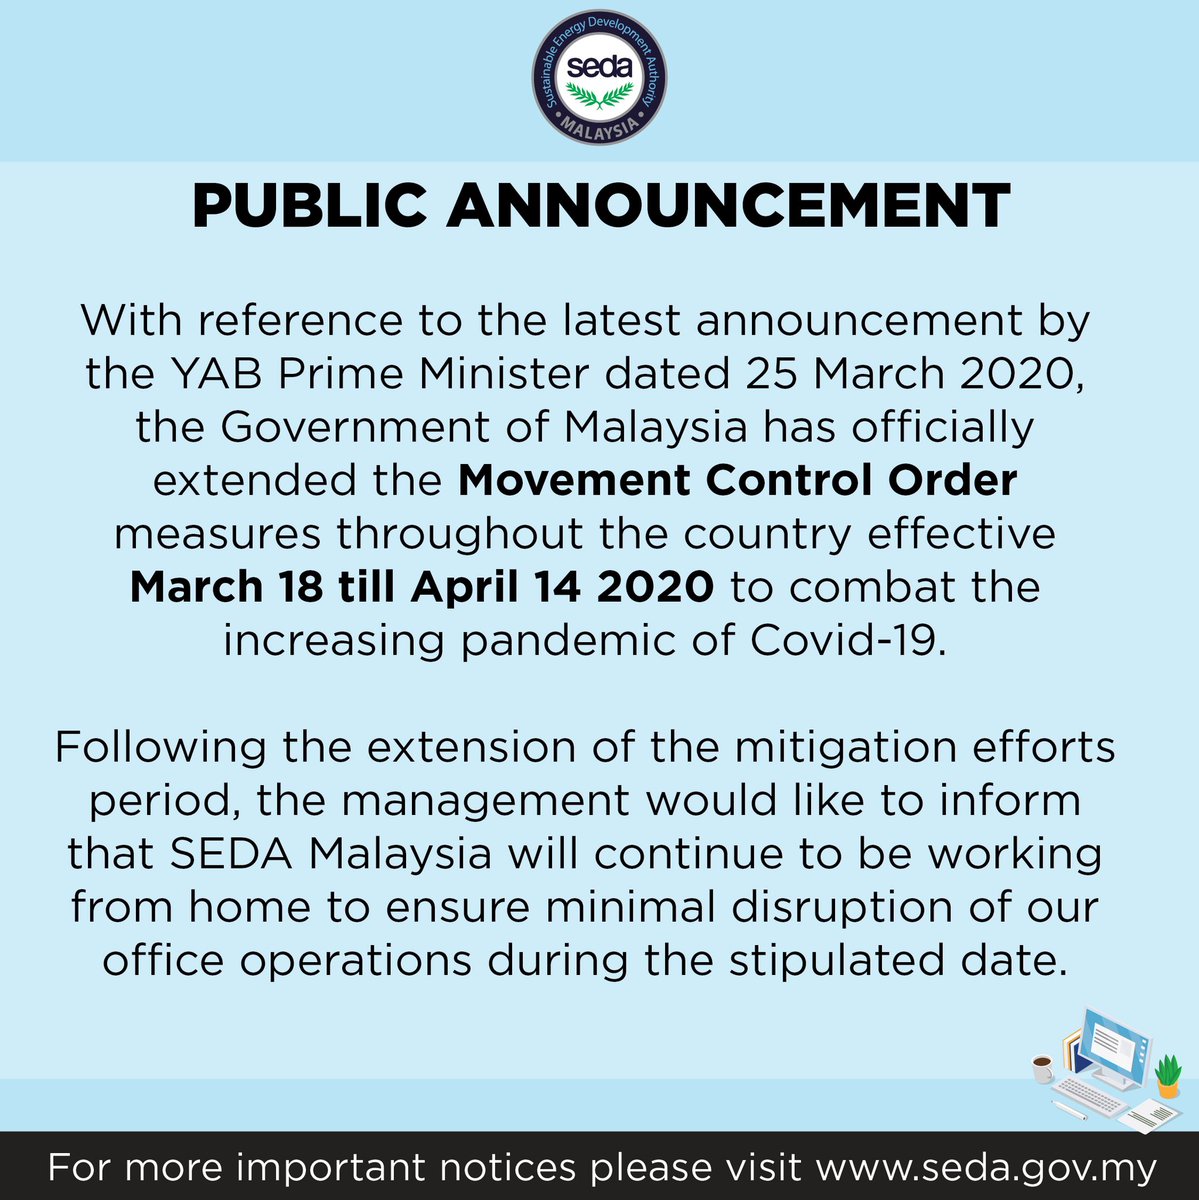 Seda Malaysia On Twitter With Reference To The Announcement By The Yab Prime Minister The Government Of Malaysia Has Officially Extended The Mco Measures Effective March 18 April 14 2020 Seda Will Continue